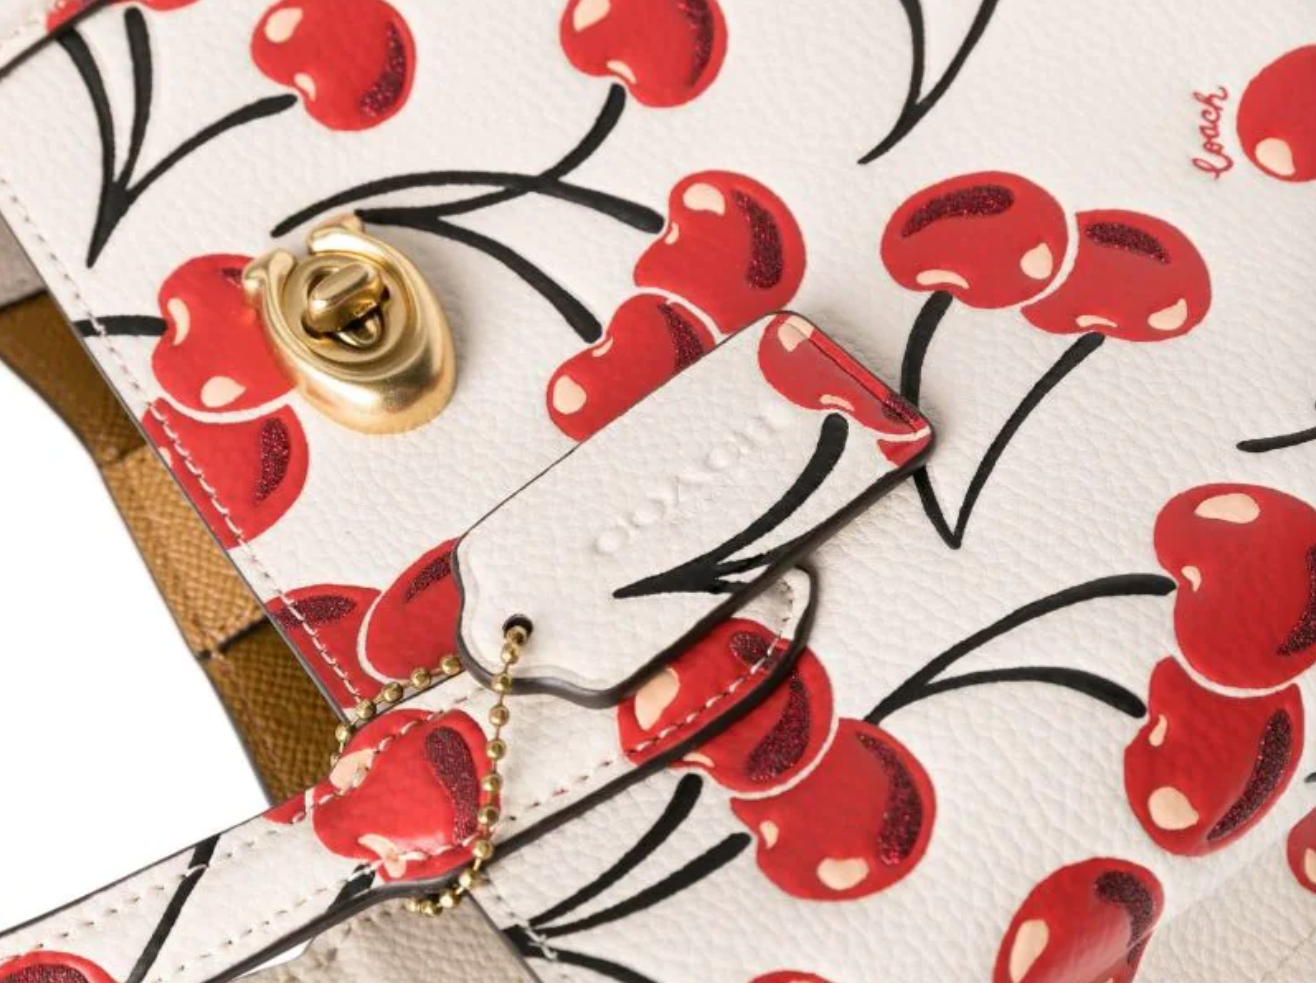 Coach's Cherry Print Handbag Collection Is 70% Off and Ripe for